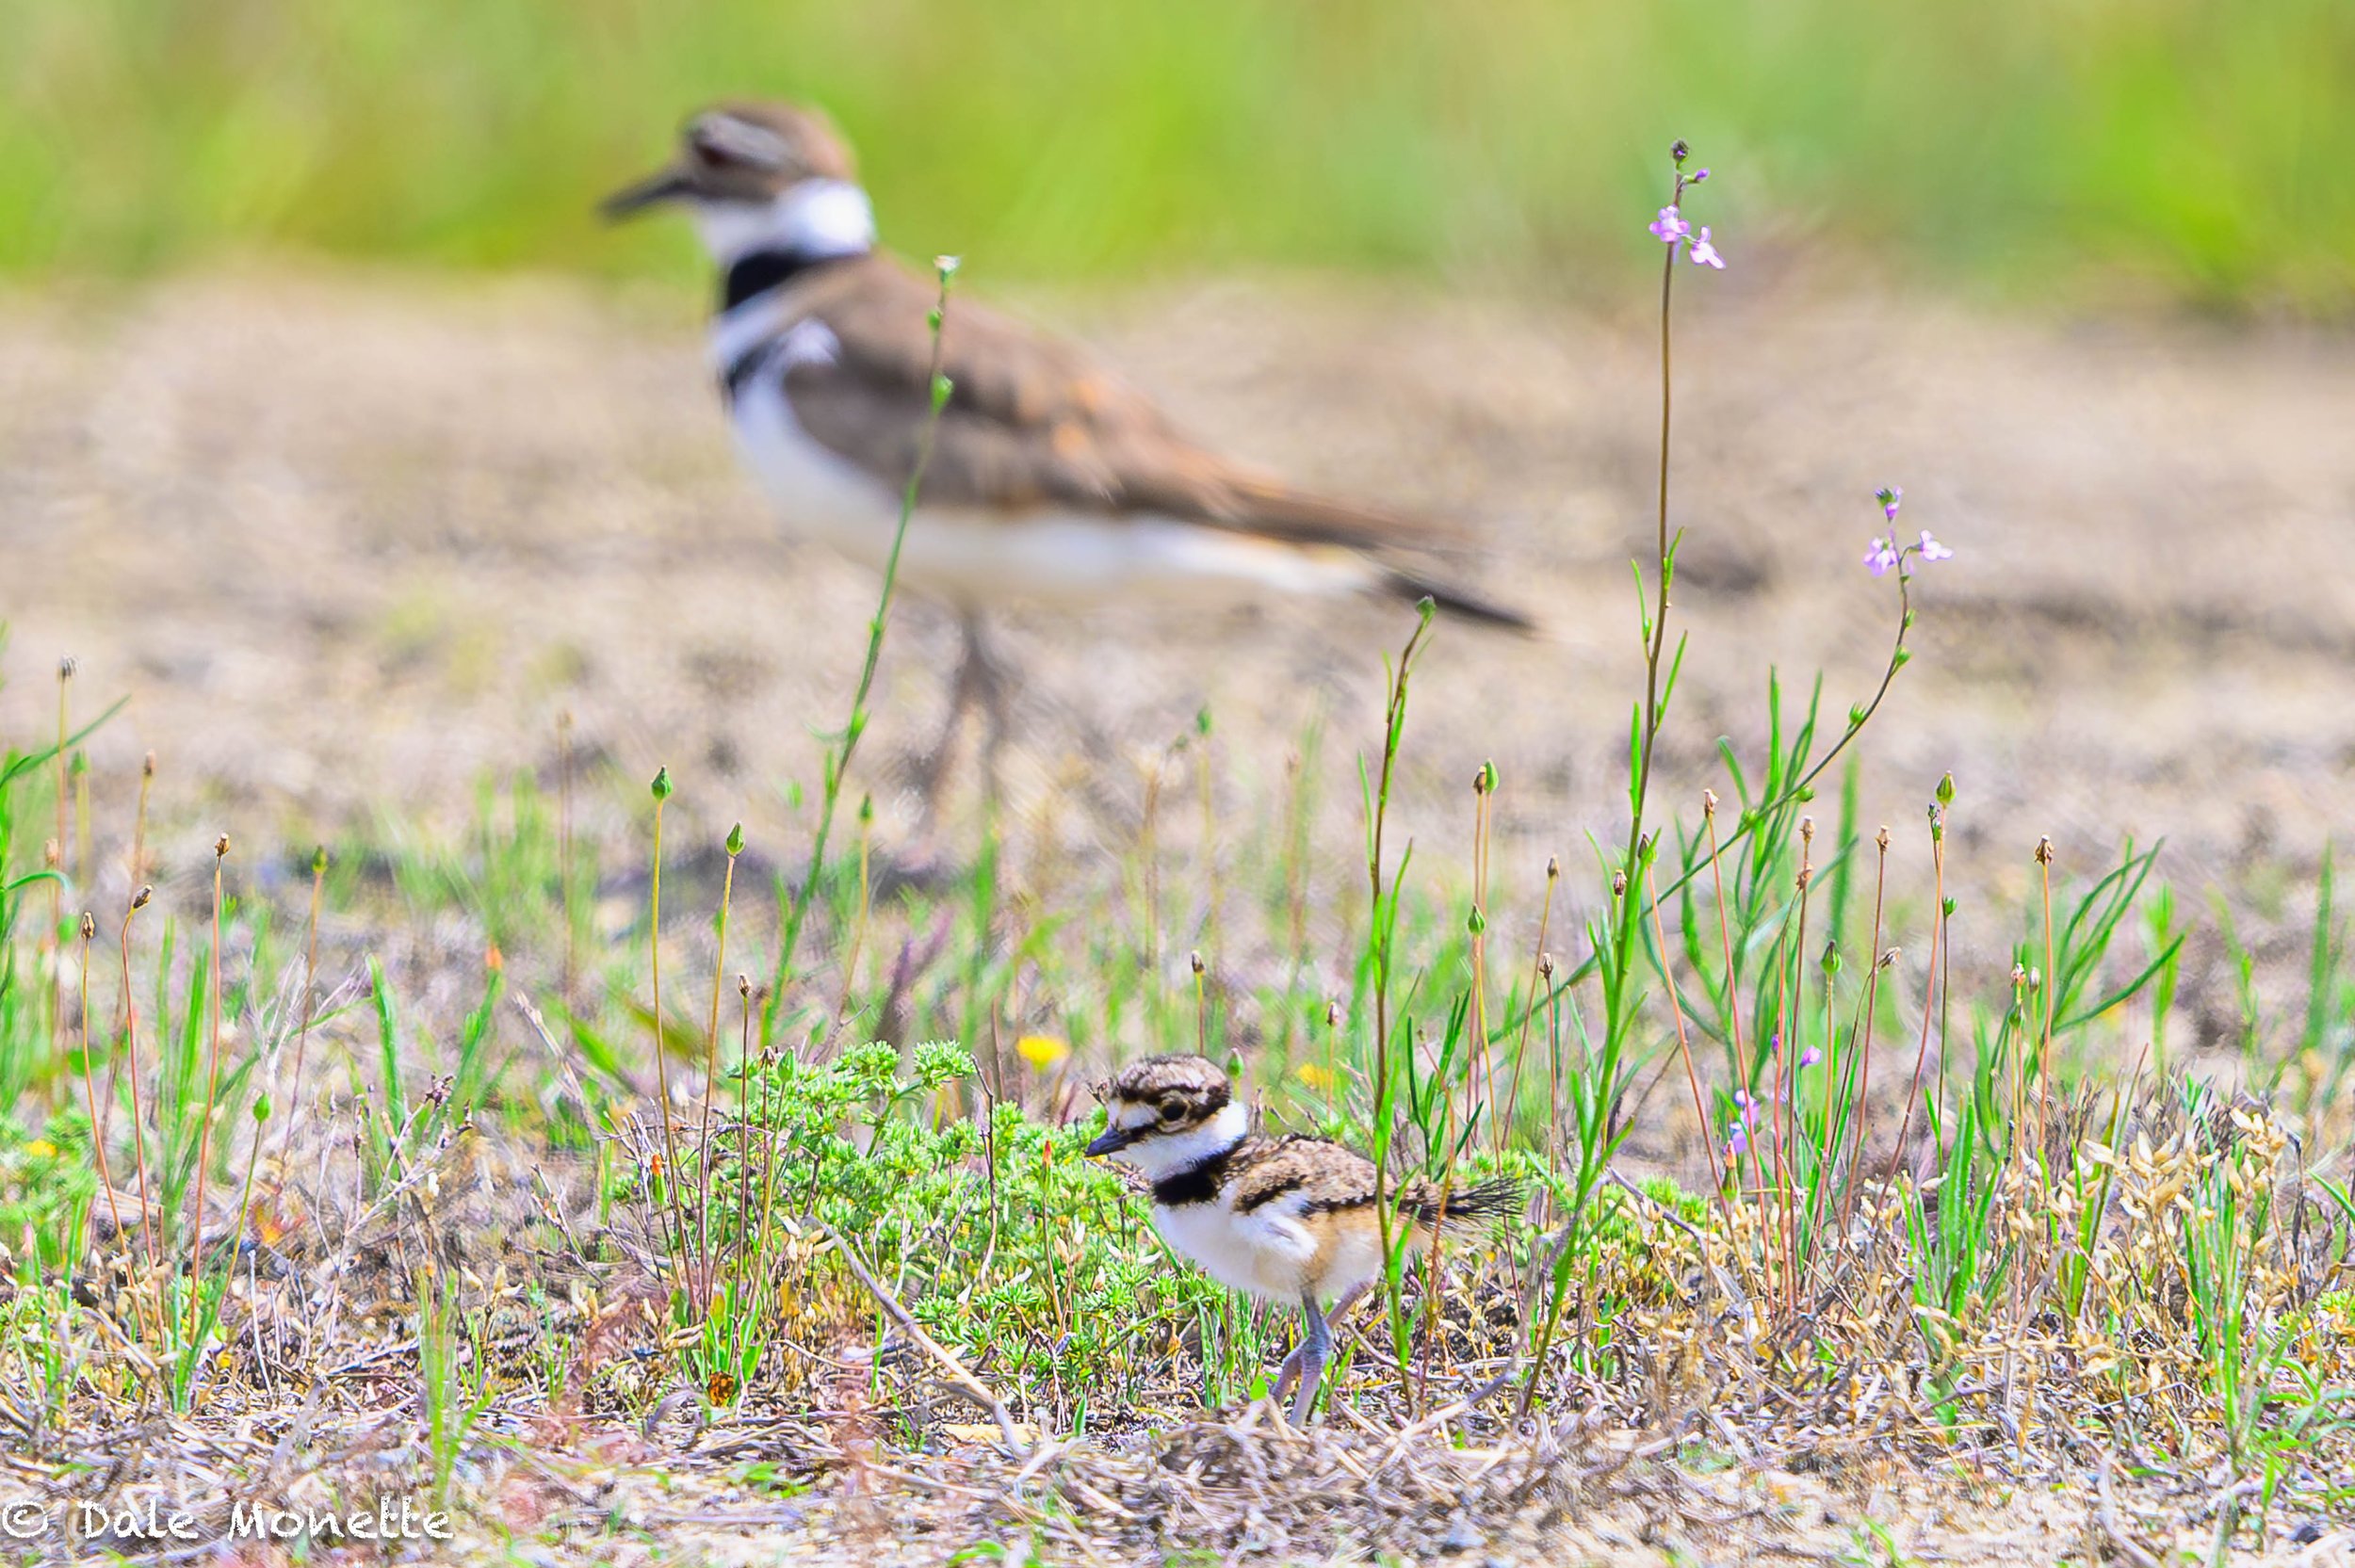   Today I found this female Killdeer and her 2 chicks feeding at a local airport where she nested. I would say the chicks are about a month old and they run like they are jet powered!  